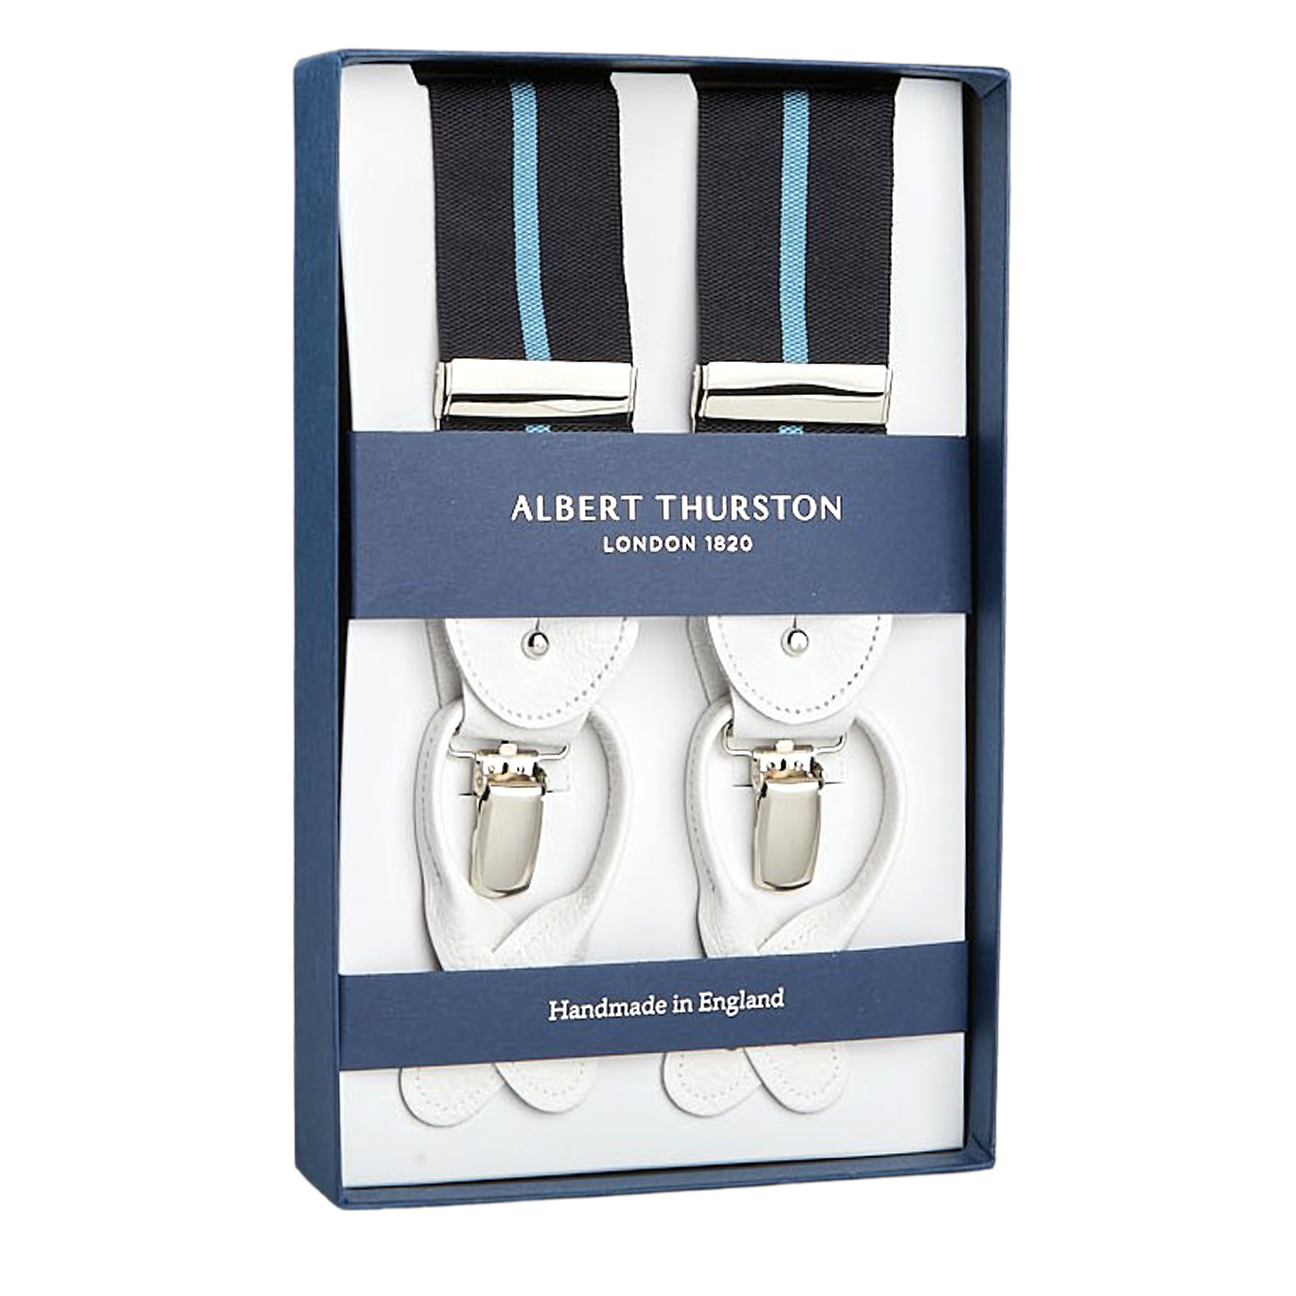 A boxed set of Albert Thurston suspenders, featuring white leather and blue Eton stripe elastic straps, labeled "Handmade in England" and inspired by Gordon Gekko from Wall Street.